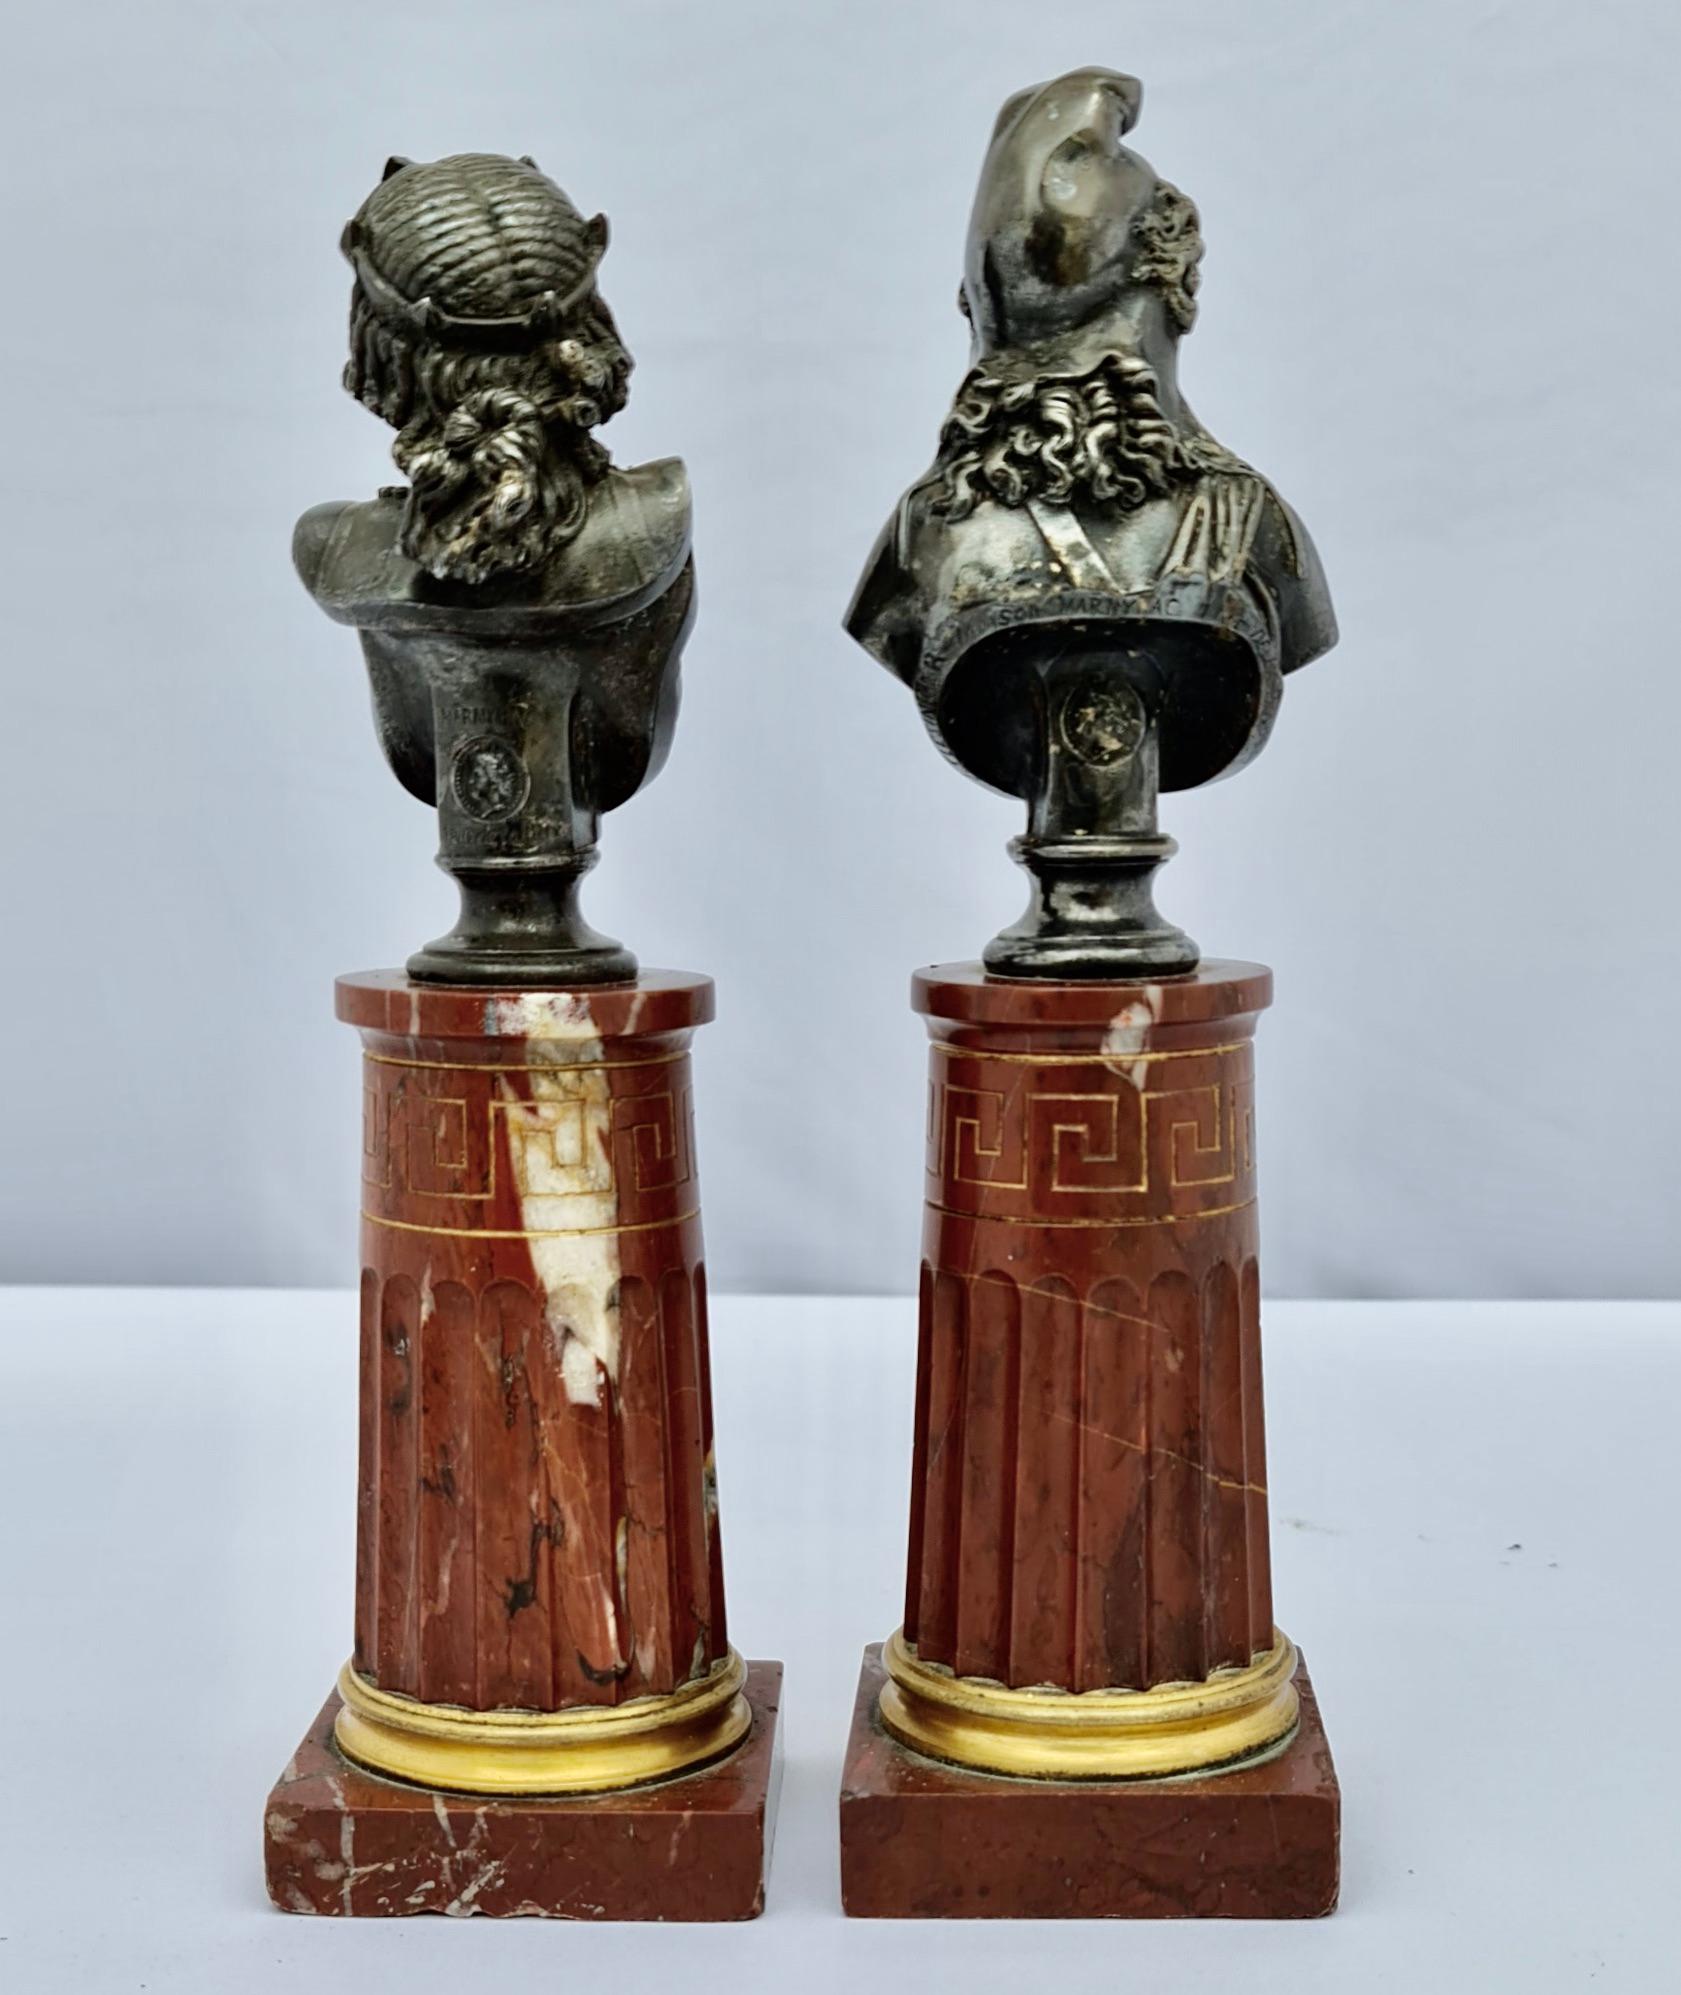 French Pair of Bronze Busts by Jean-Baptiste Clesinger Et Marnyhac, Paris